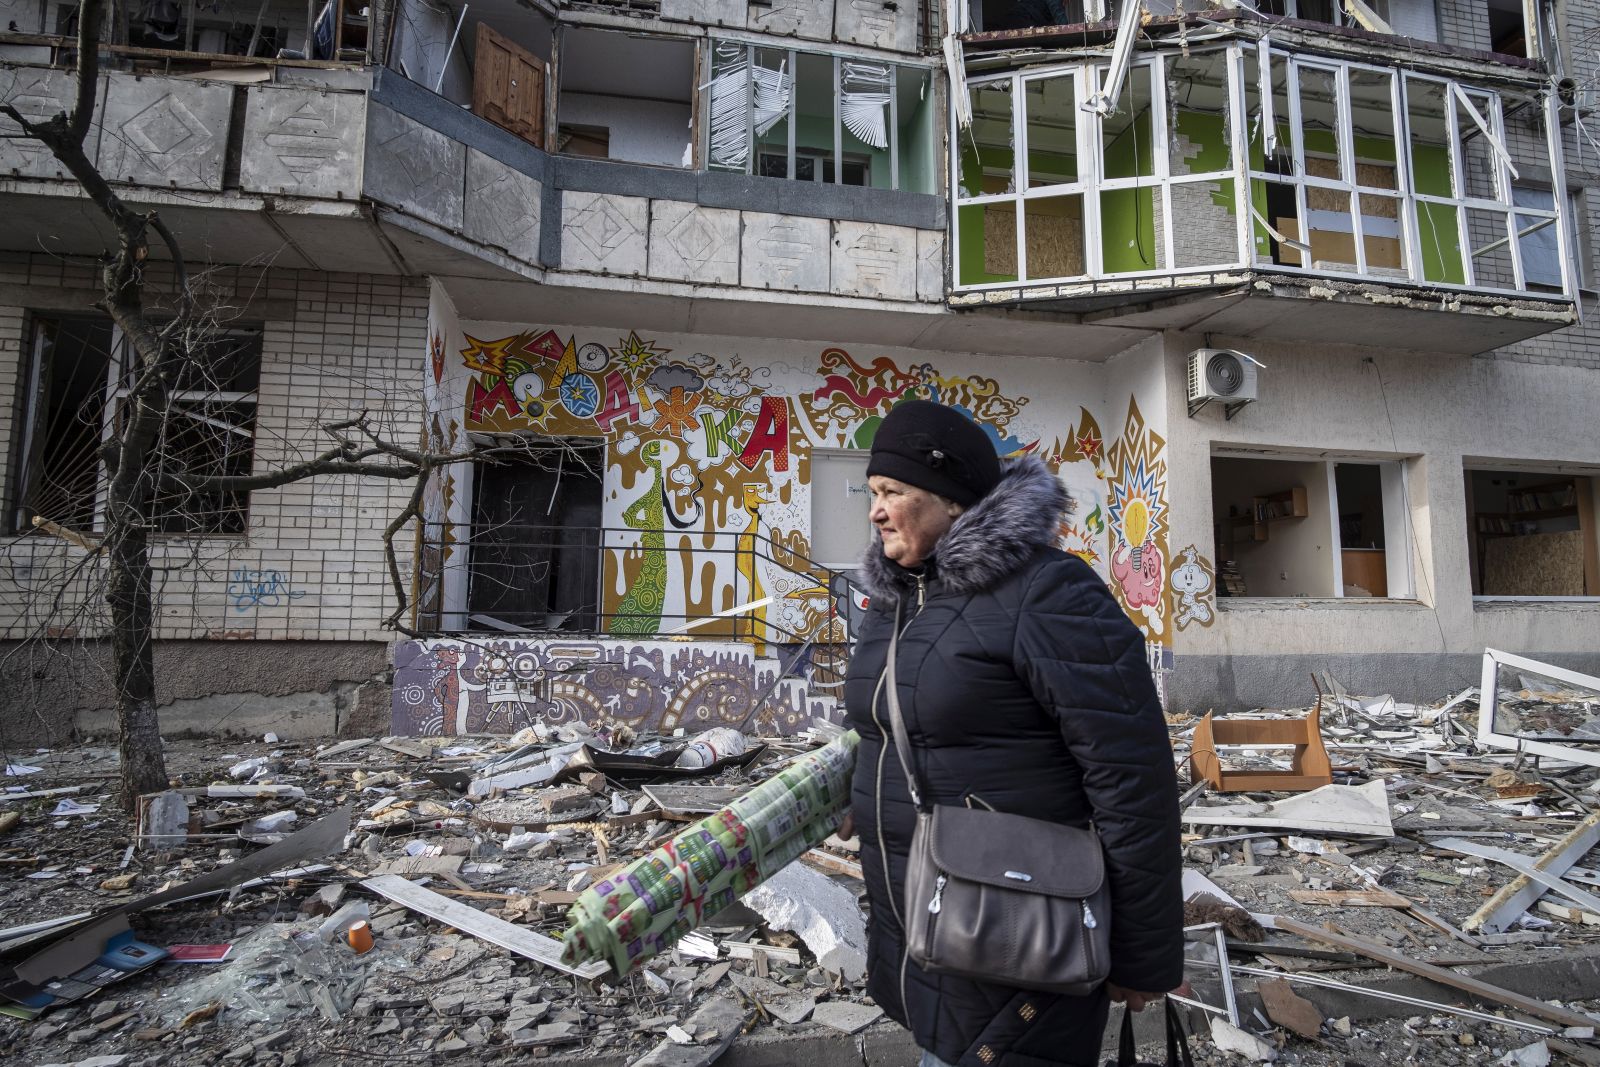 epa10375640 A resident passes a destroyed residential building following overnight shelling in Kherson, Ukraine, 21 December 2022. Ukrainian troops entered Kherson on 11 November after the Russian army had withdrawn from the city which they captured in the early stage of the conflict, shortly after Russian troops had entered Ukraine in February 2022. The Ukrainian president accused the Russian army of deliberately destroying critical infrastructure during their withdrawal from the city of Kherson, including electricity and water supplies.  EPA/Maria Senovilla